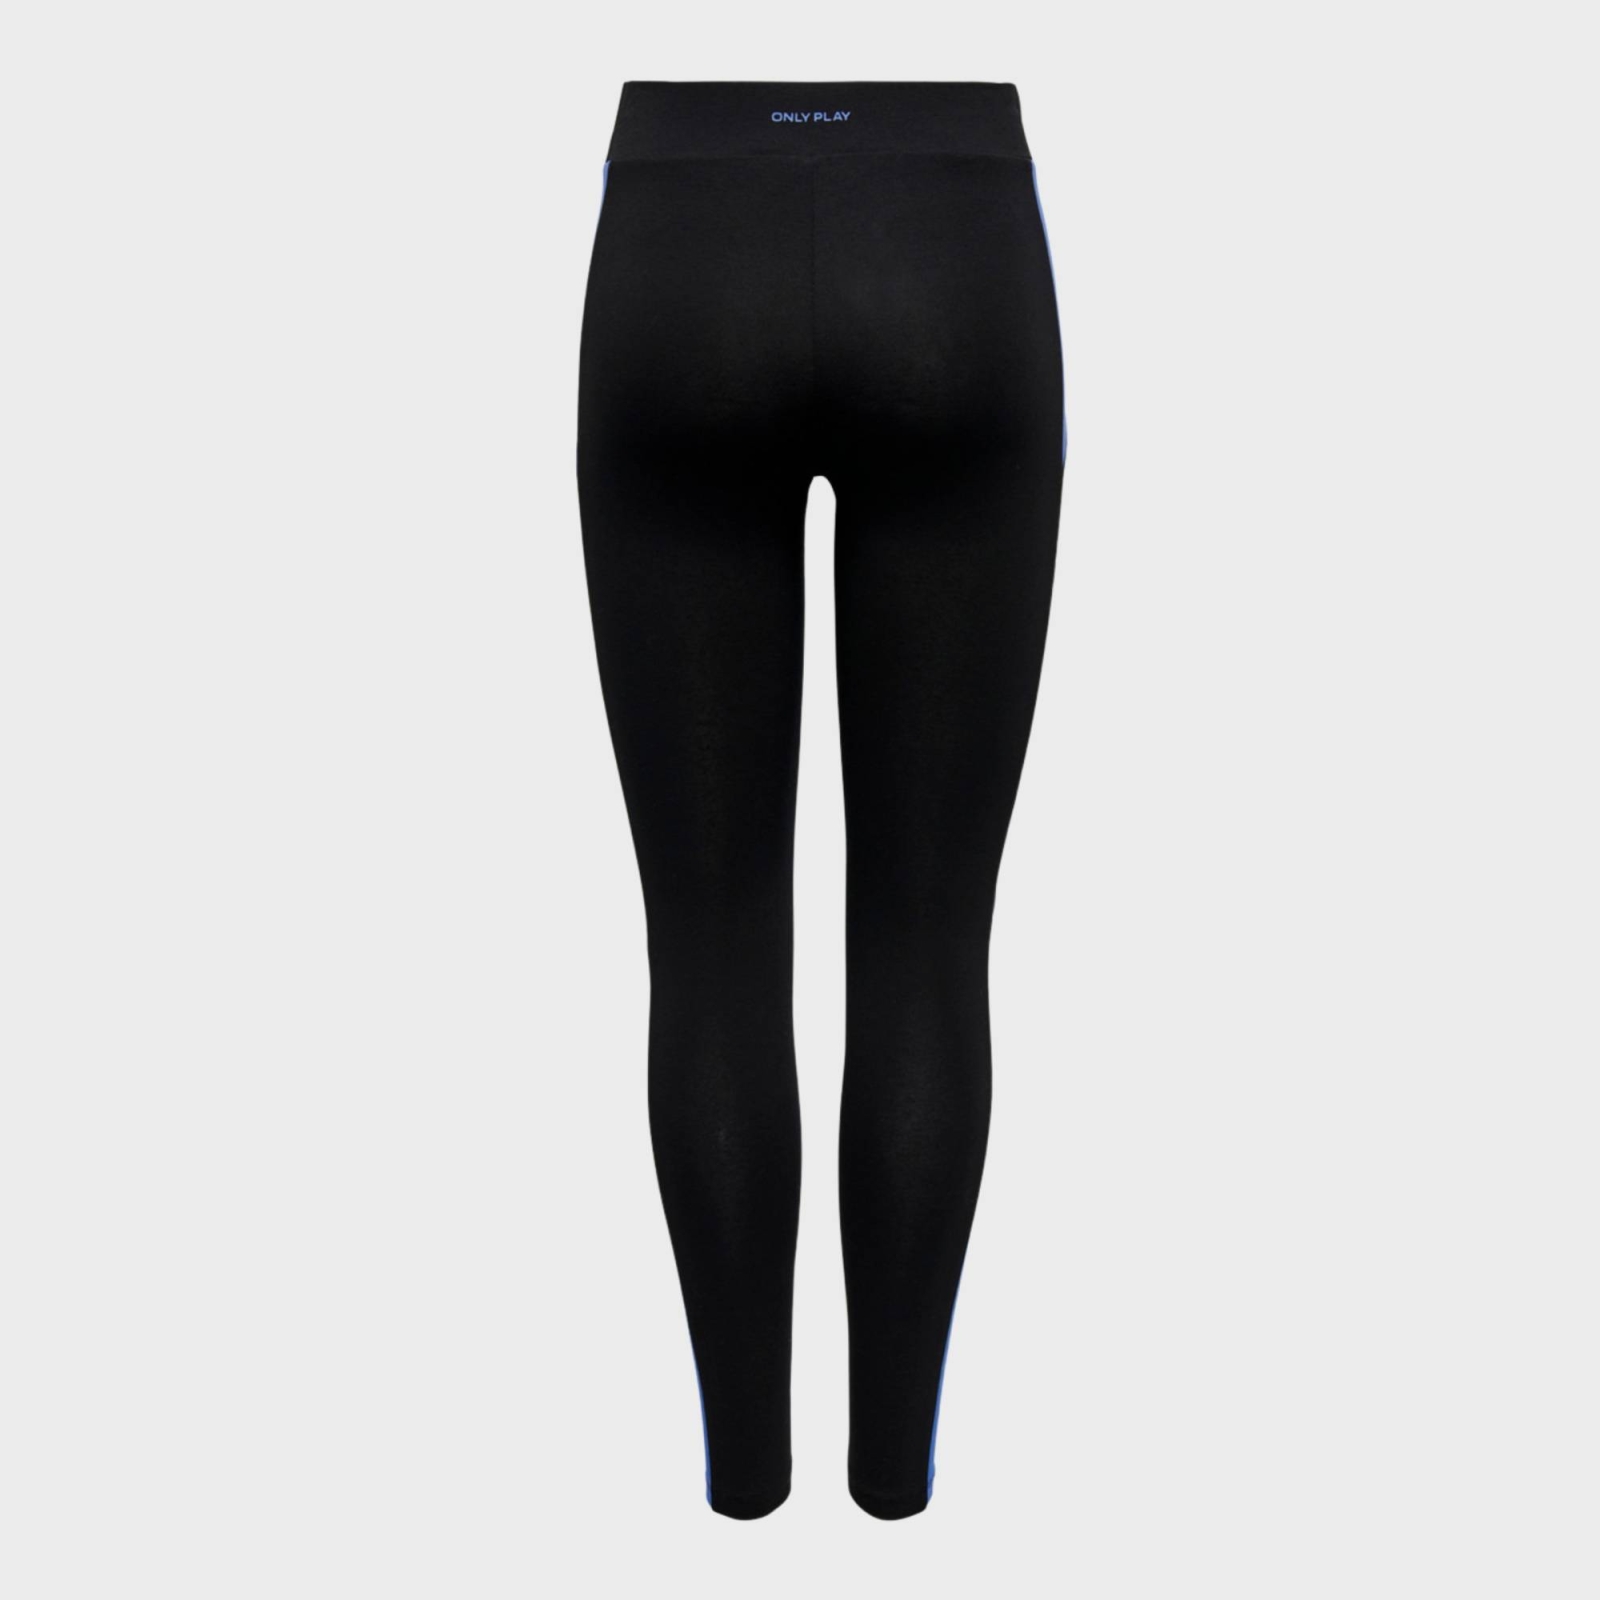 ONLY PLAY ATHLUXE HIGH WEIST JERSEY LEGGINGS